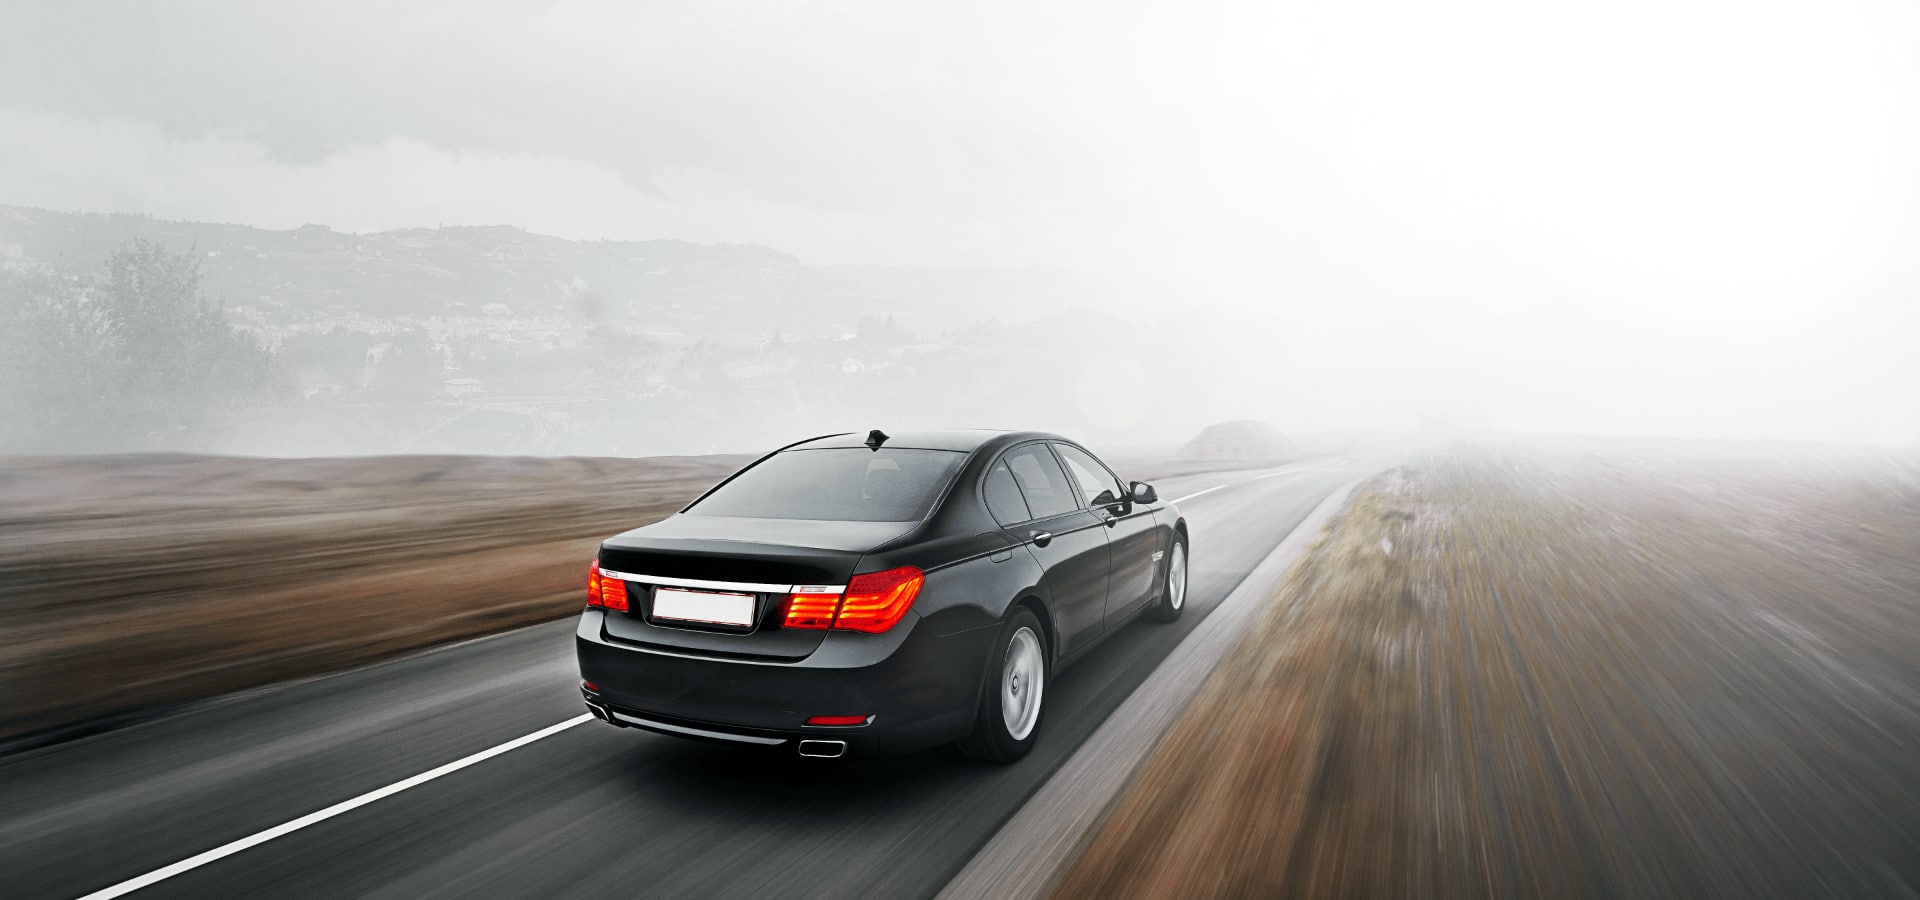 A black four-door sedan driving on a two-lane highway on a foggy day with mountains in the distance.